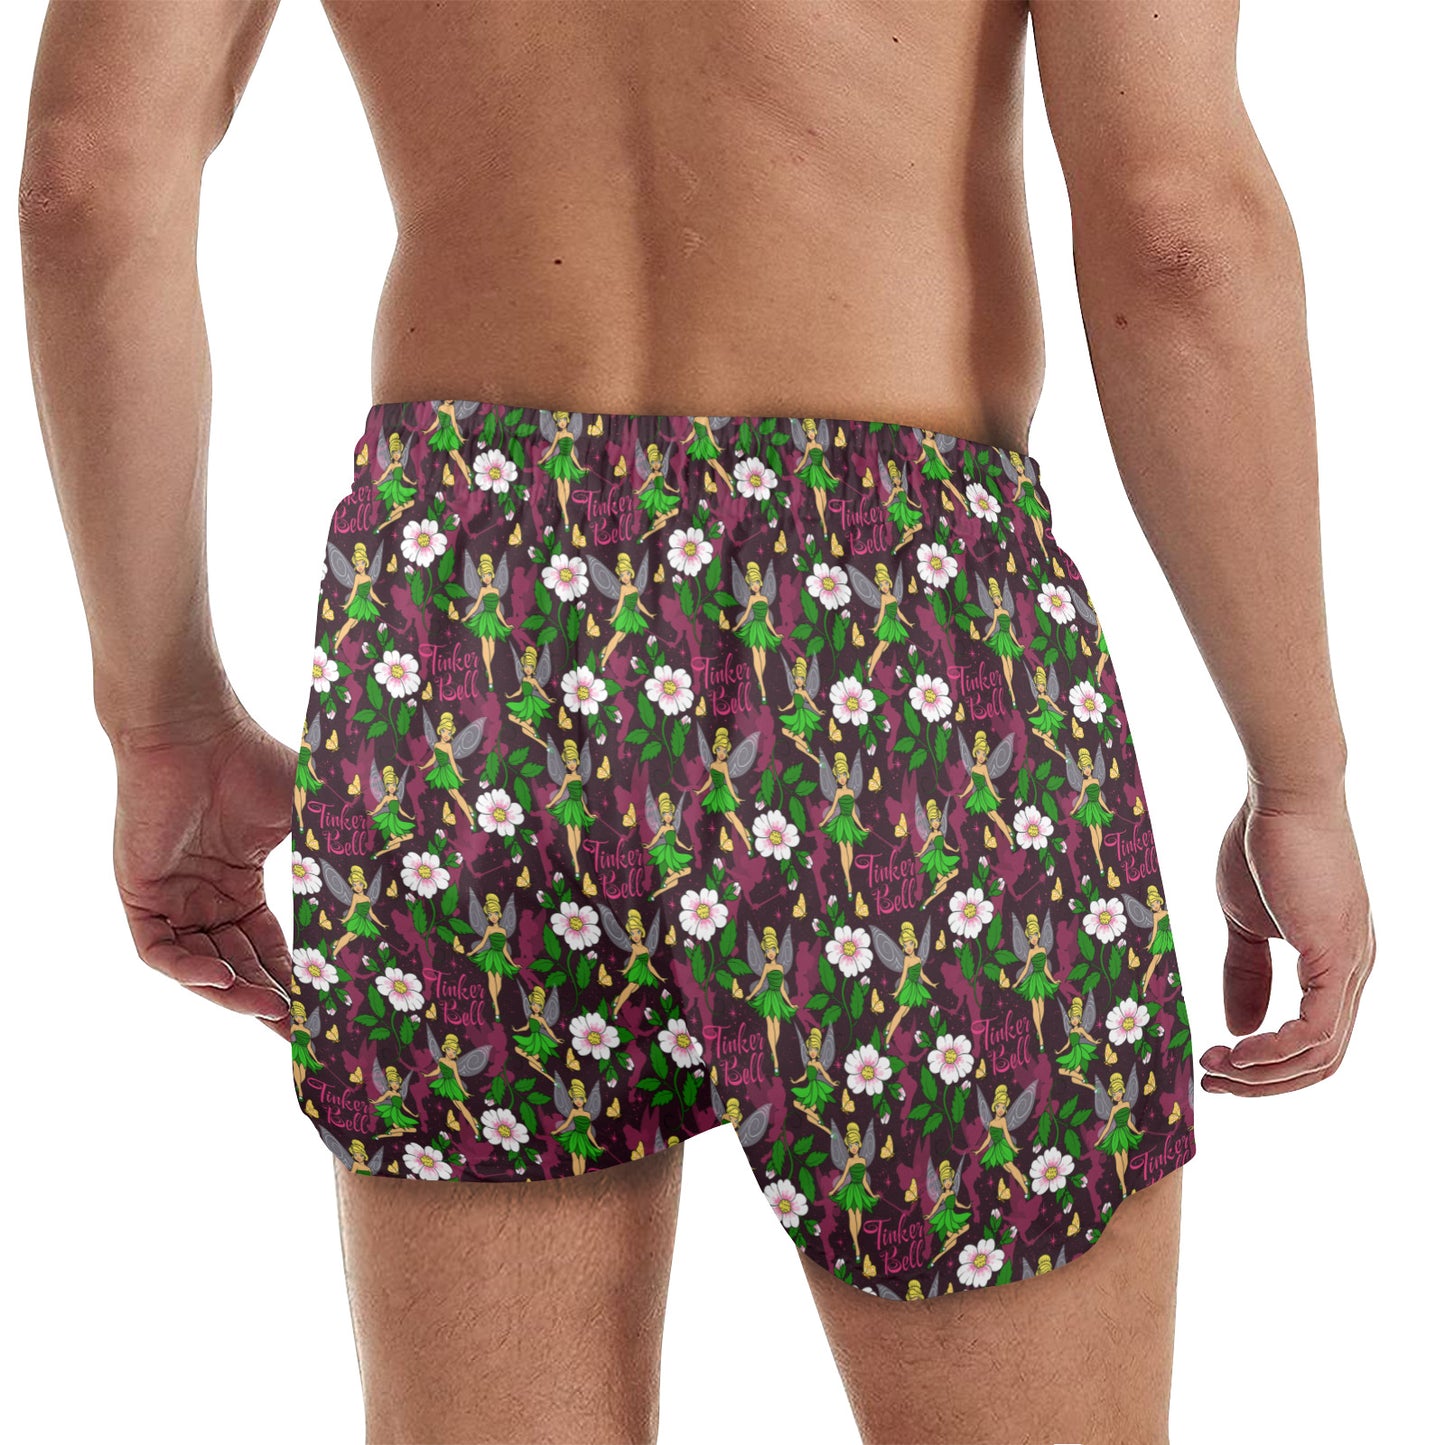 Tinker Bell Men's Quick Dry Athletic Shorts